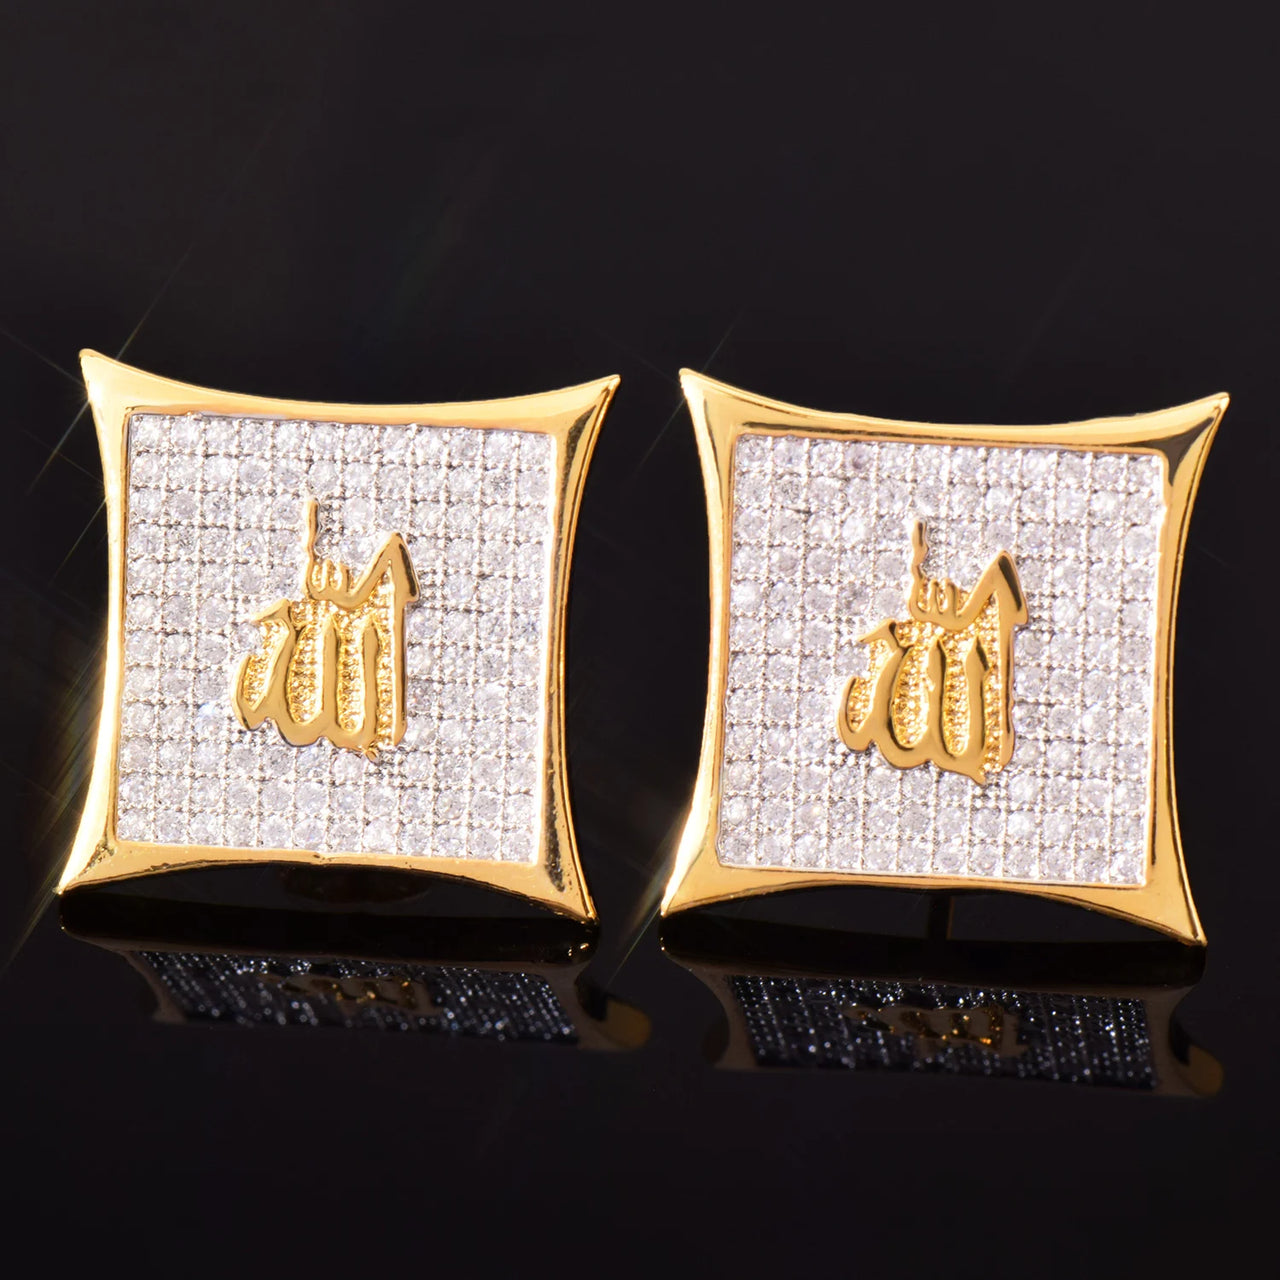 15mm Square Cut Allah Earrings - Different Drips